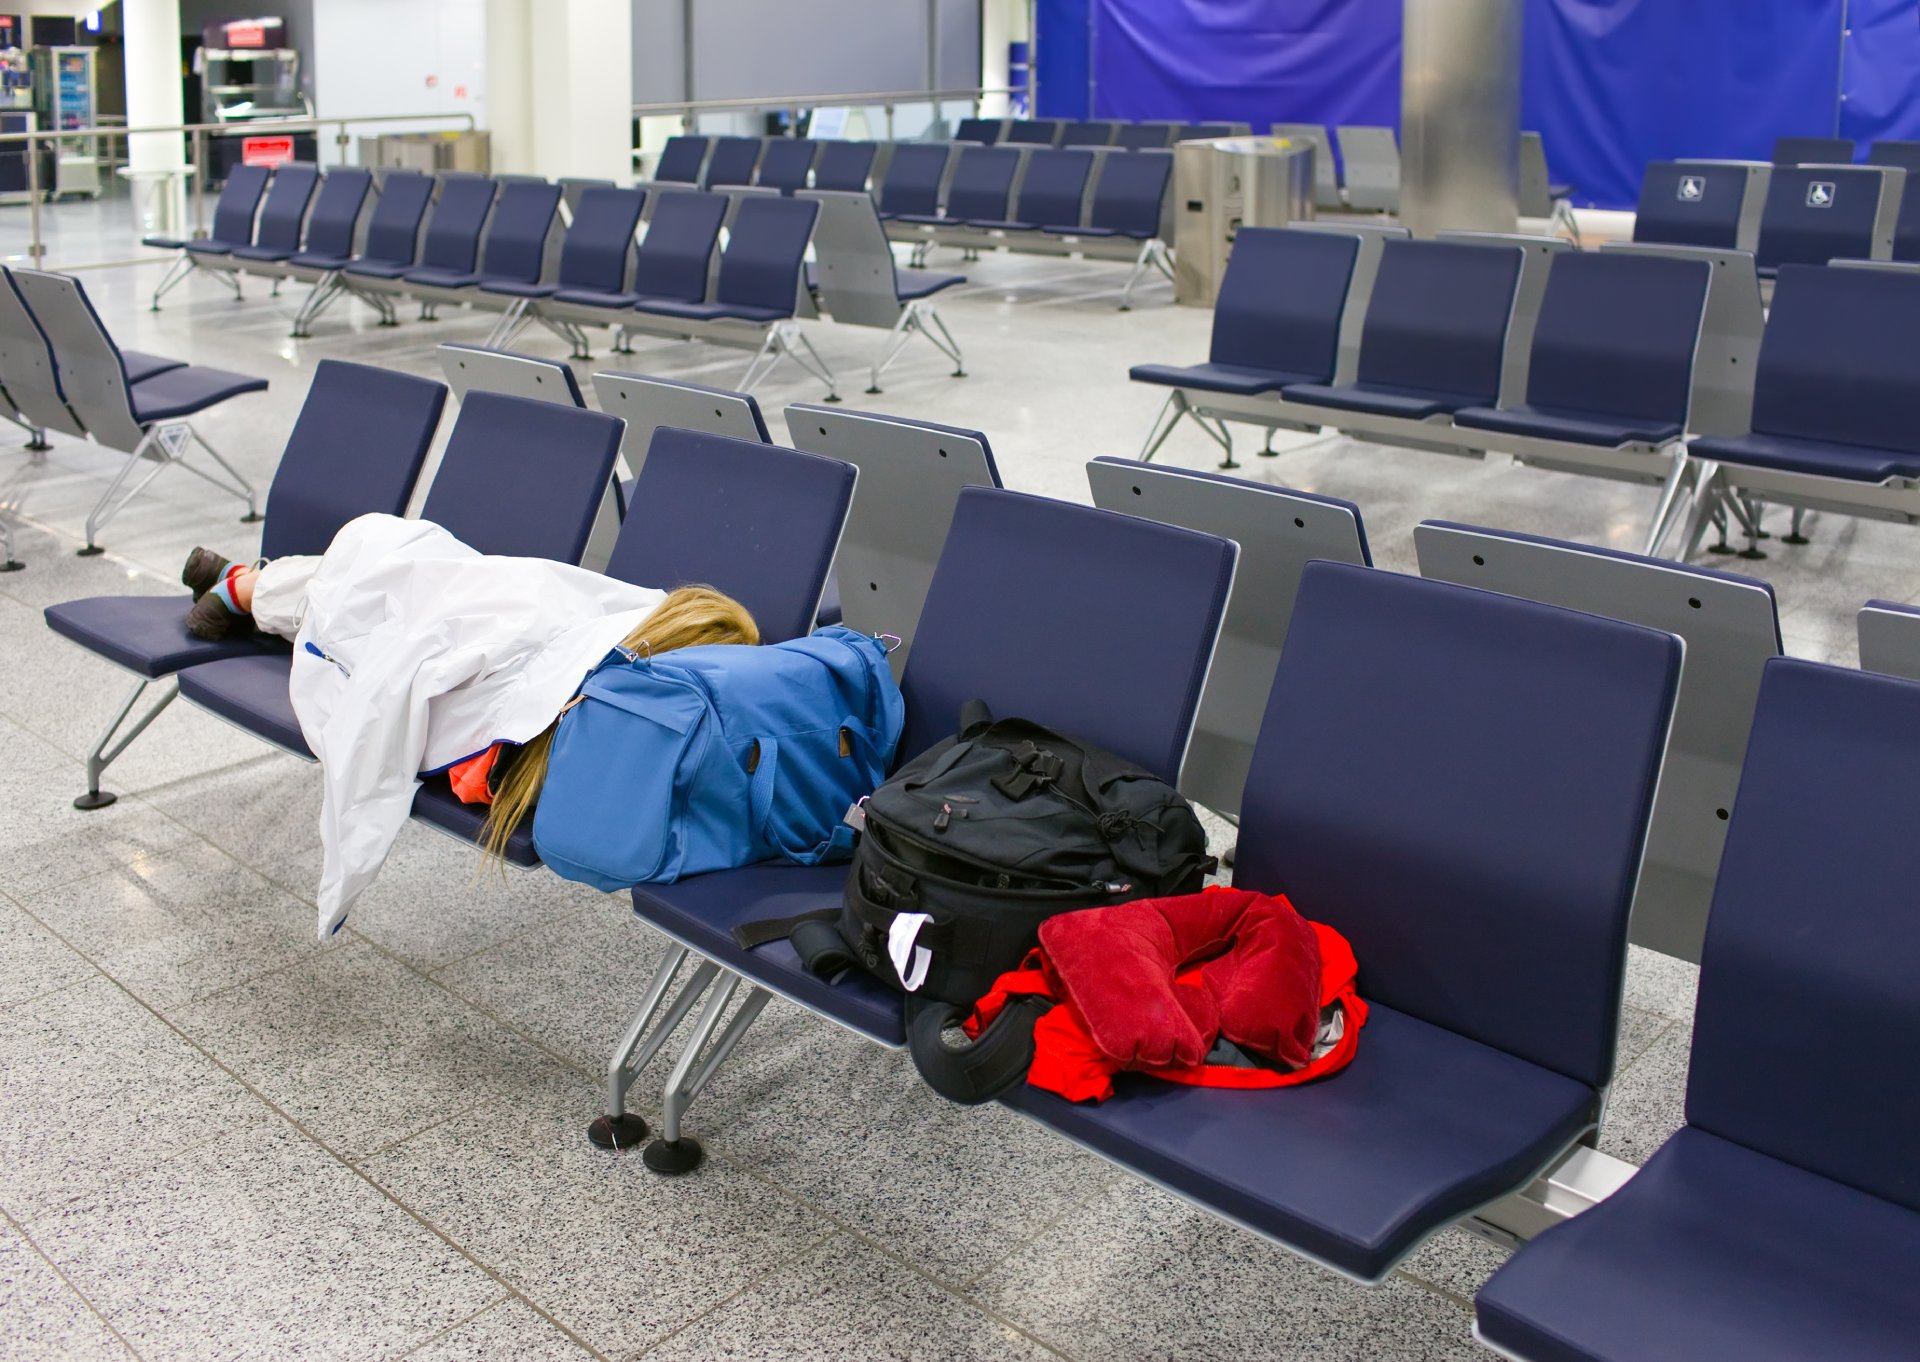 Expert Tips for an Unplanned Overnight Airport Layover